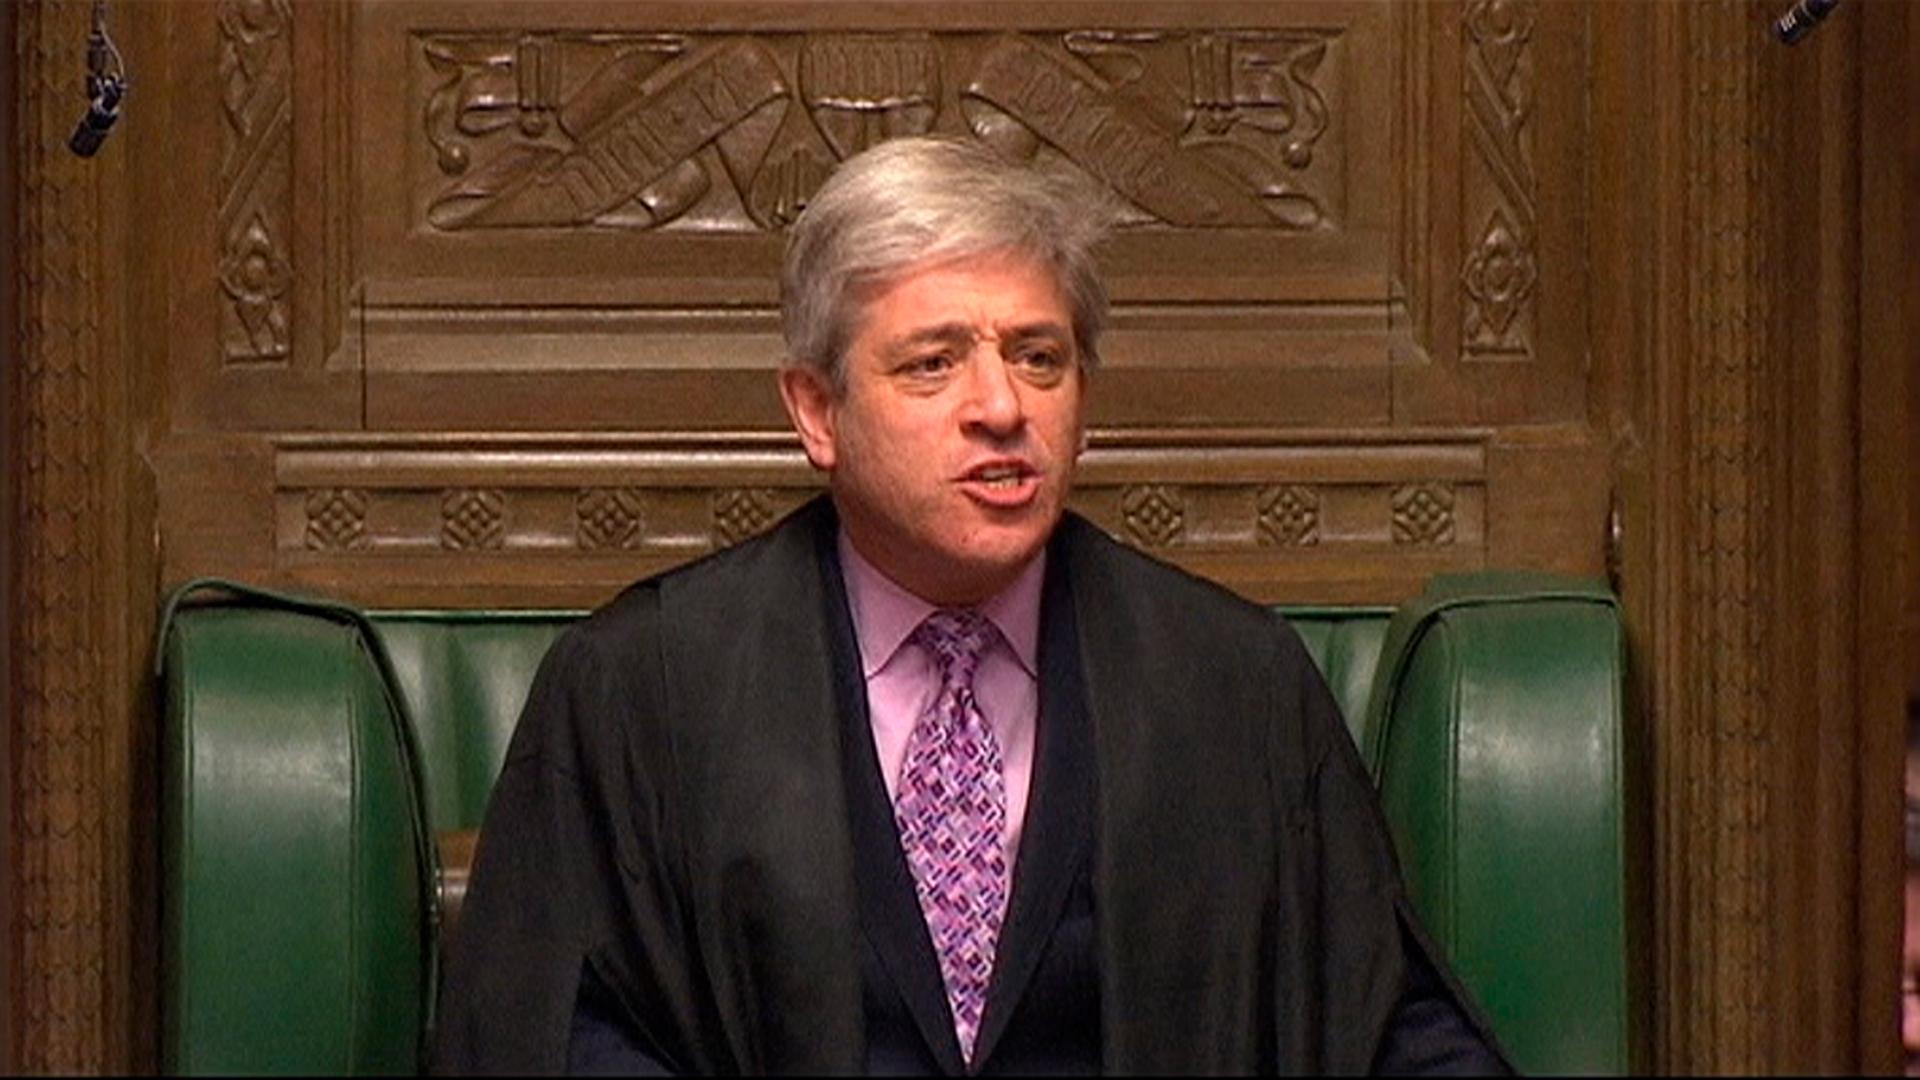 Steven Bercow, the Speaker in the House of Commons. The Speaker's role is traditionally neutral in British politics.